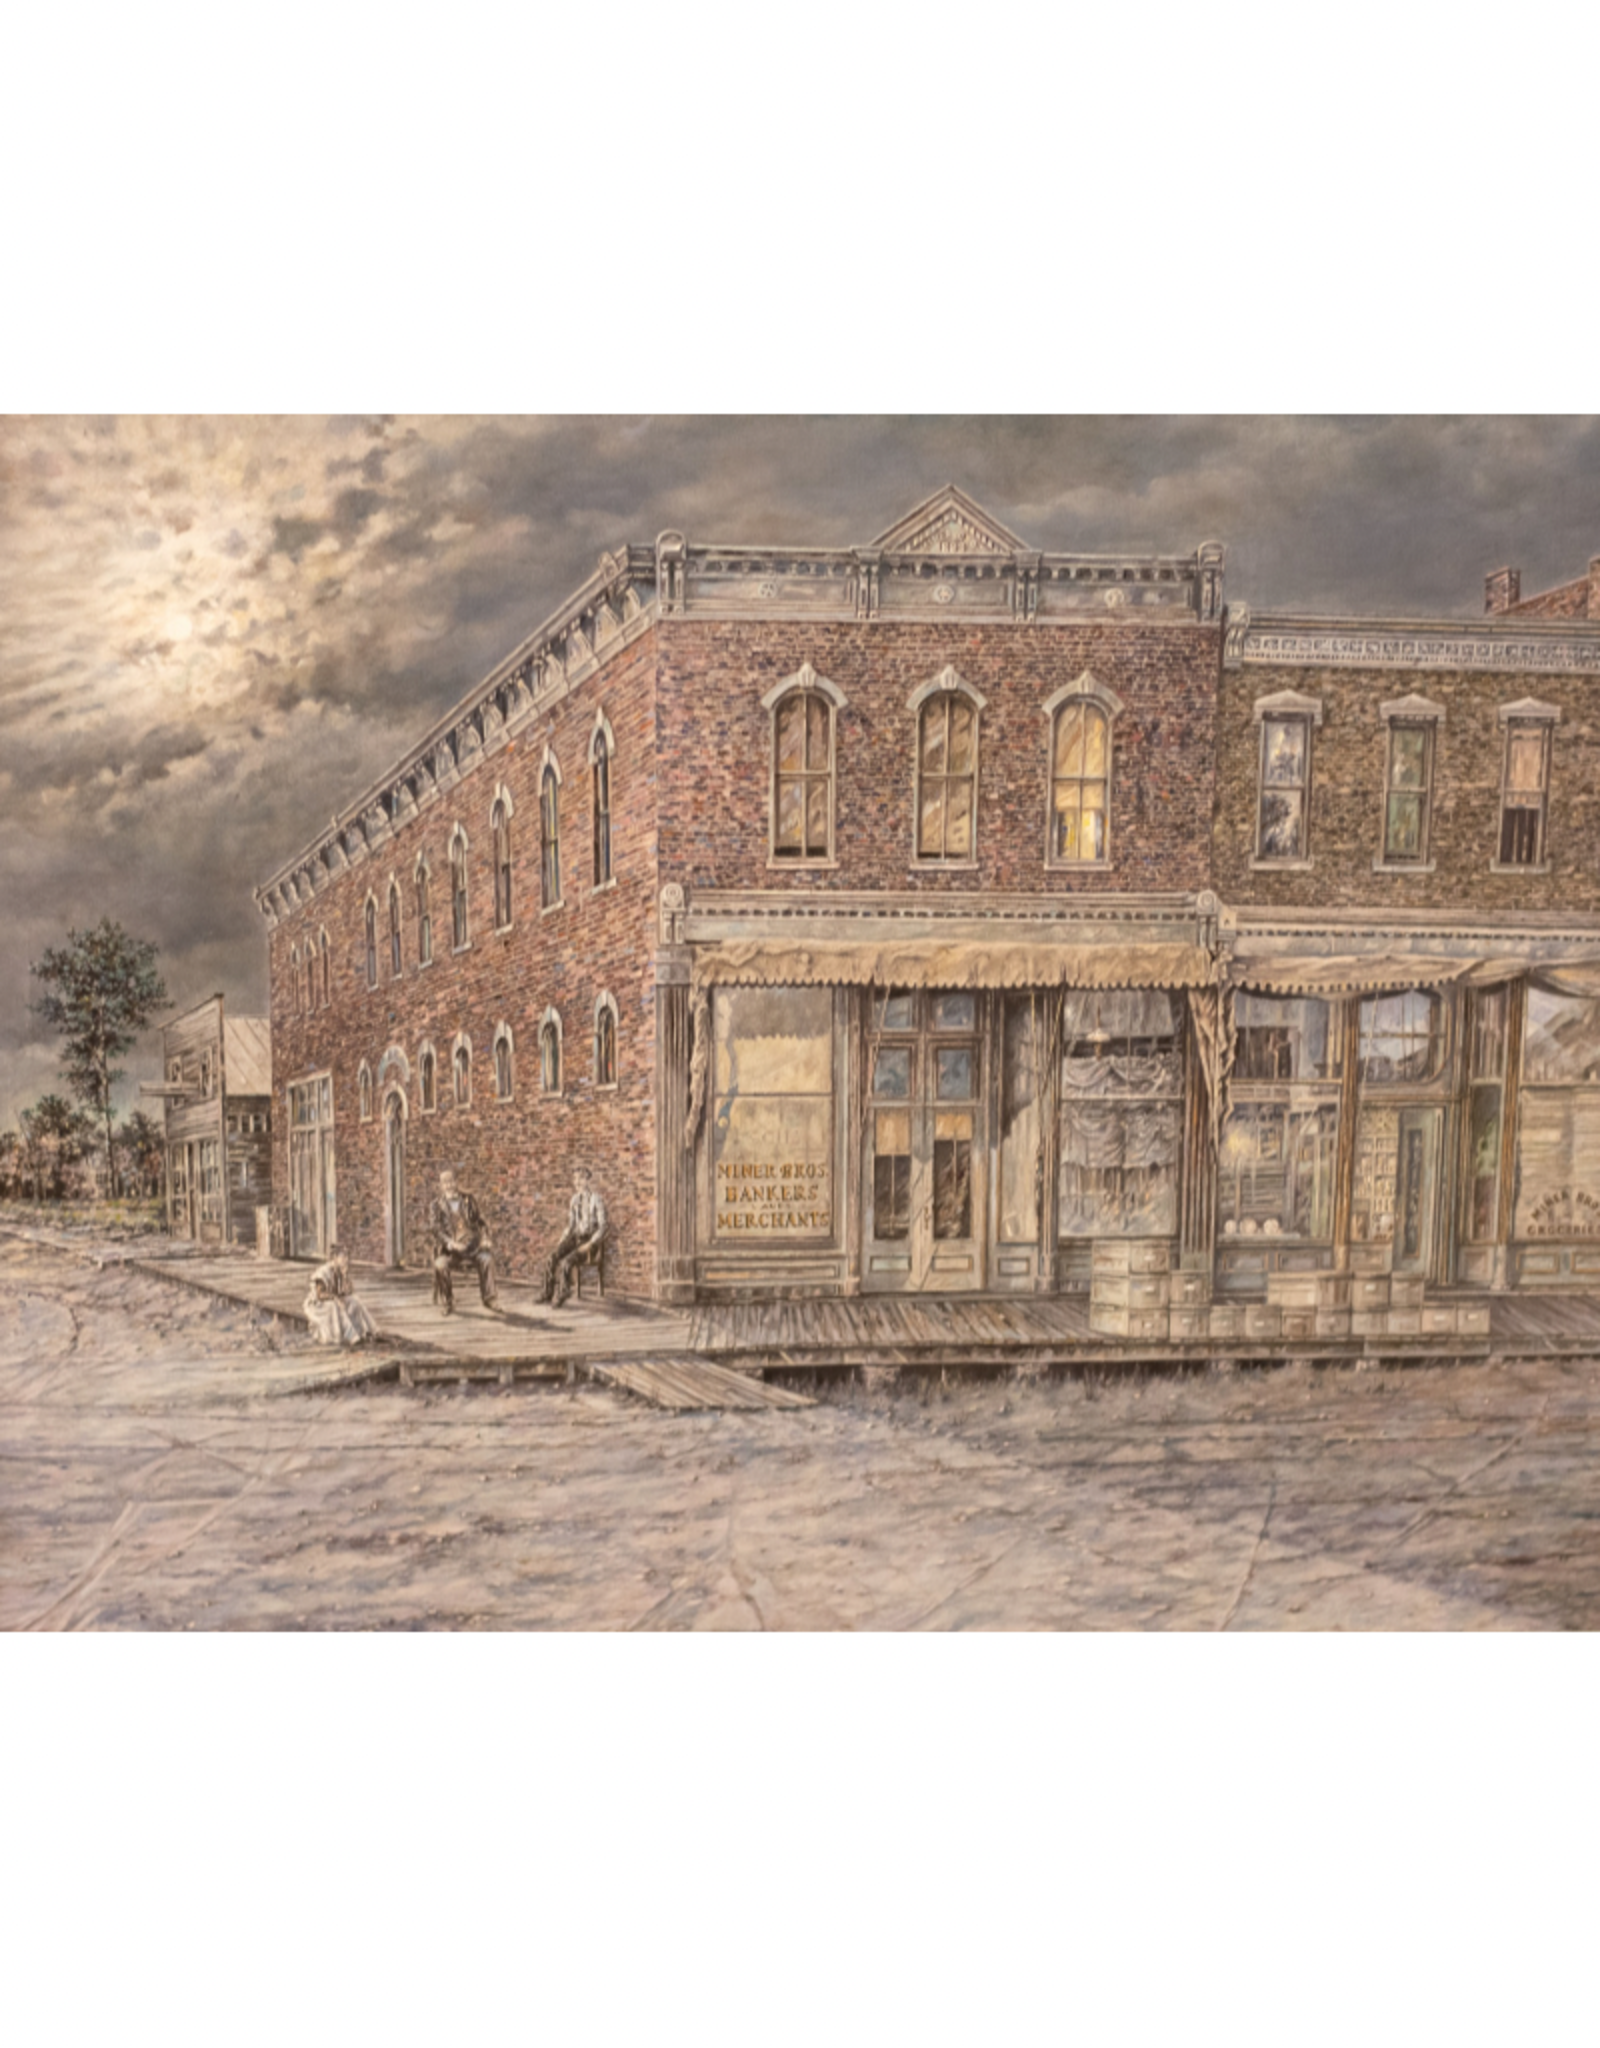 Consignment John Bergers Print: Beside the Red Brick Wall